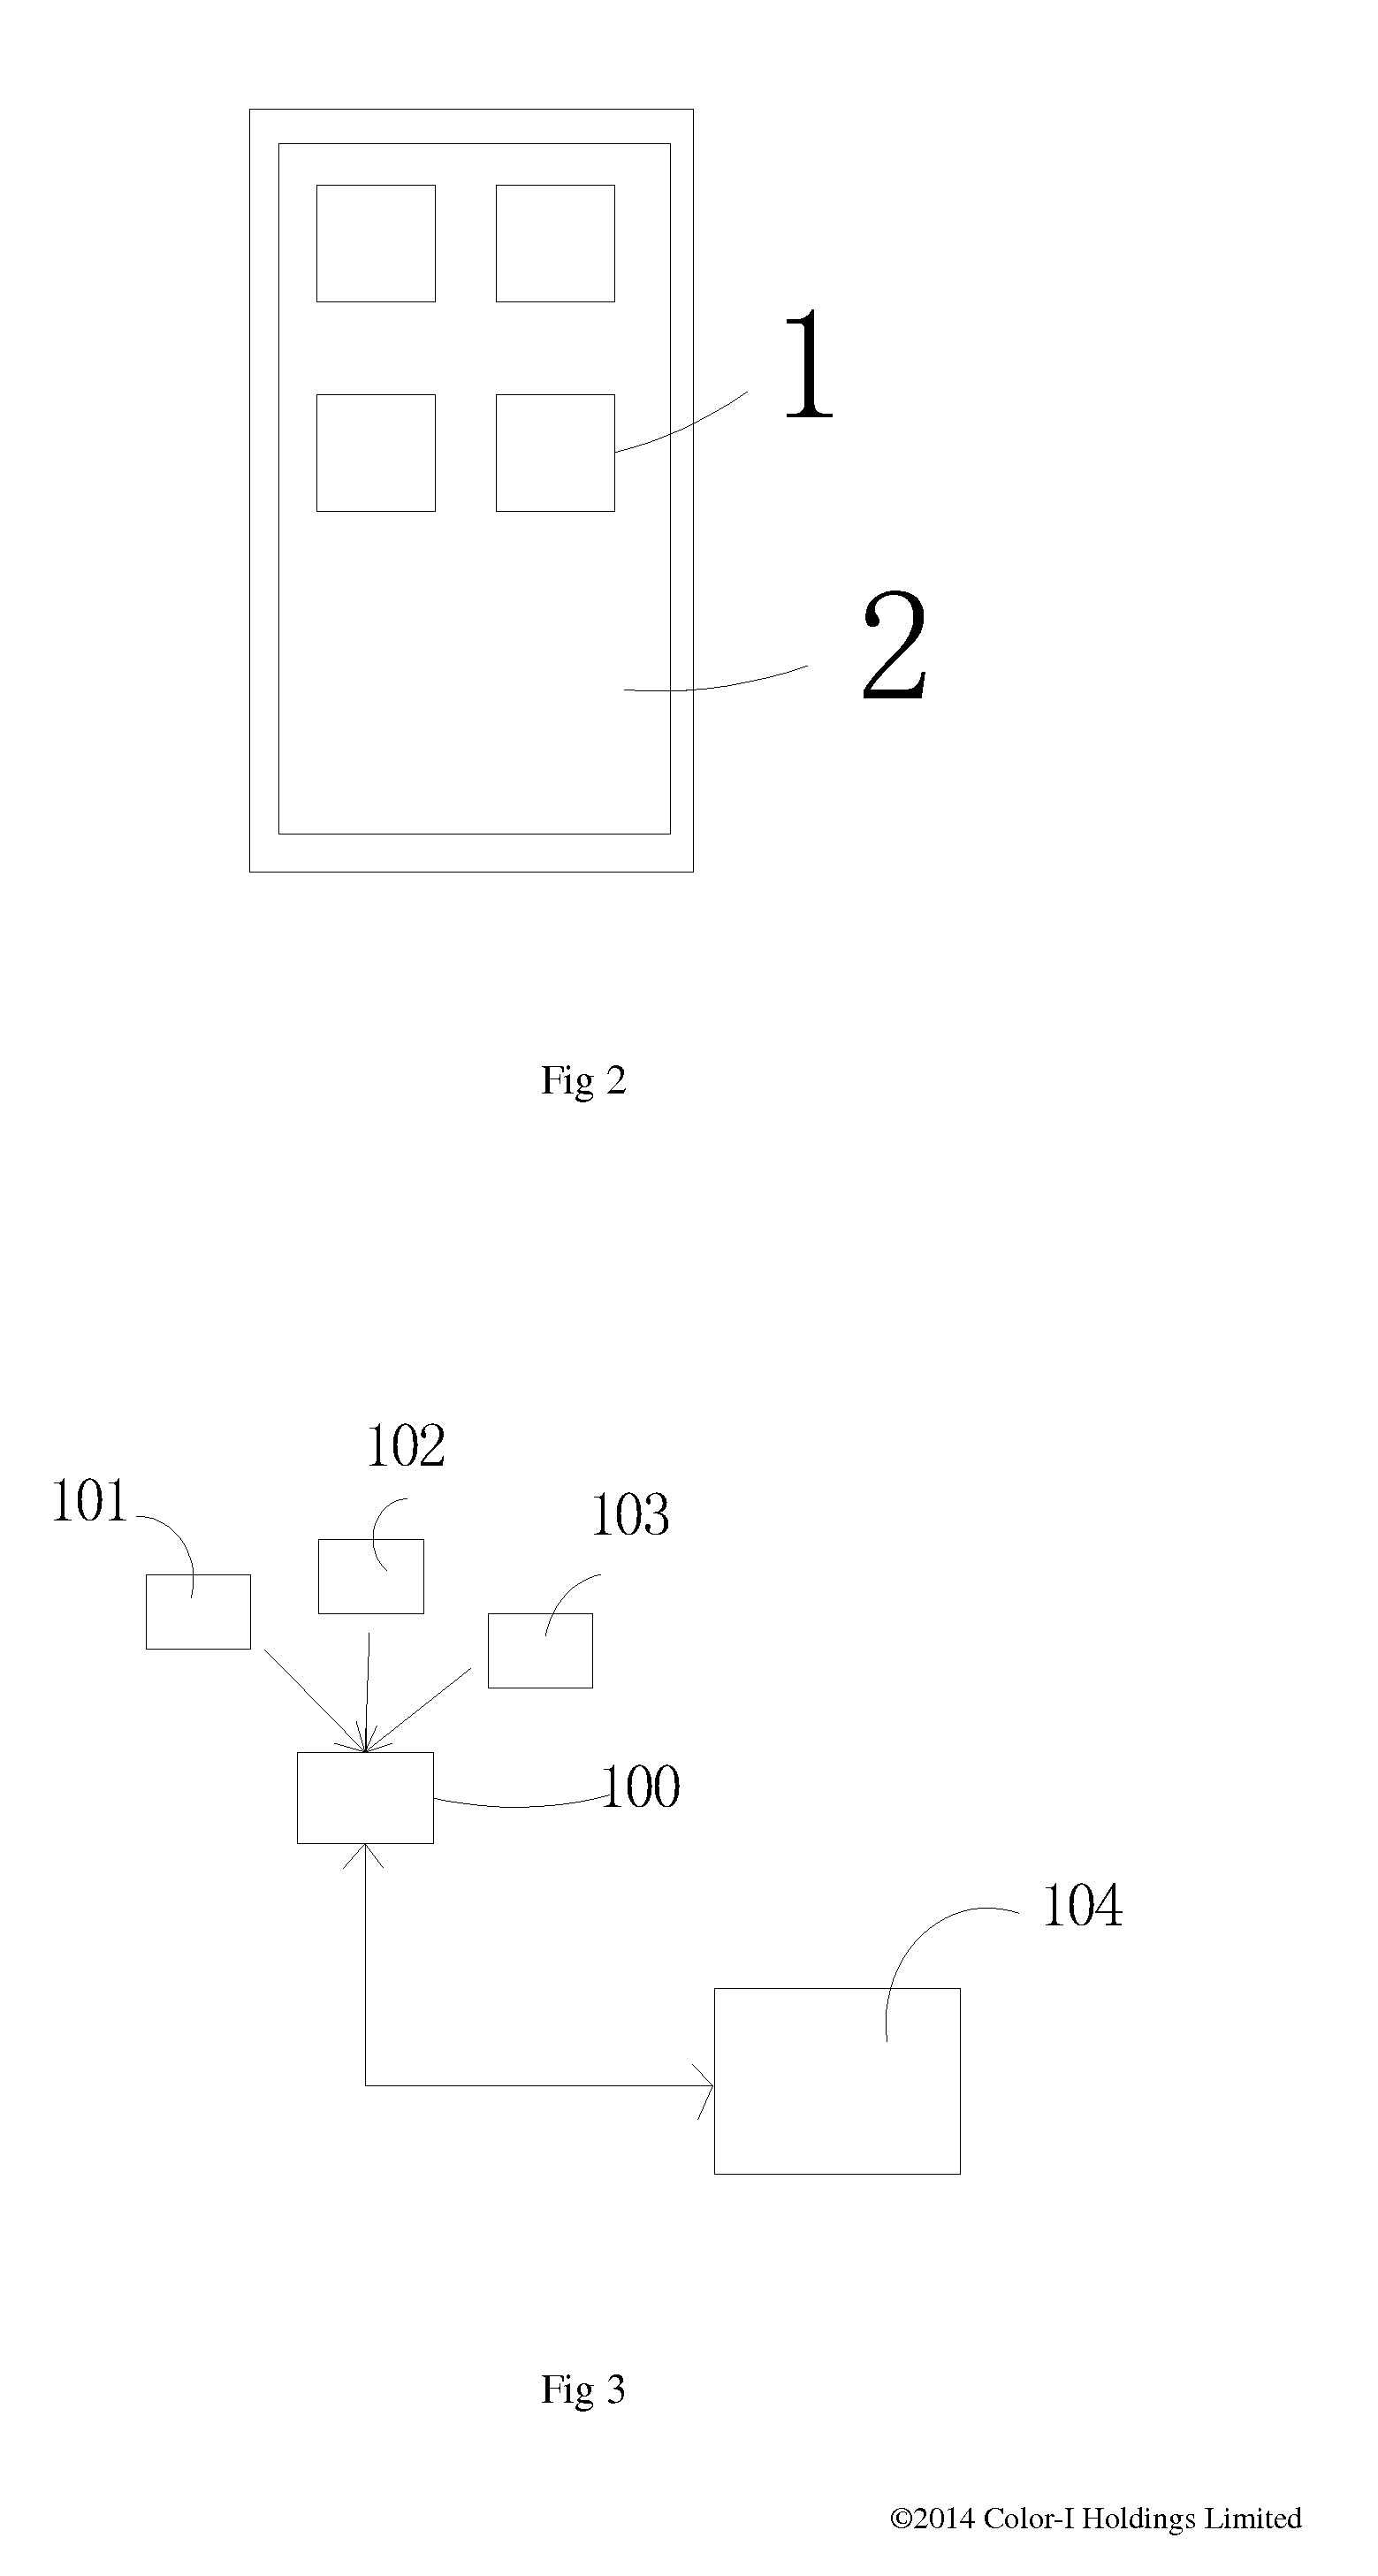 Method for activating a sim card and obtaining balance in real-time